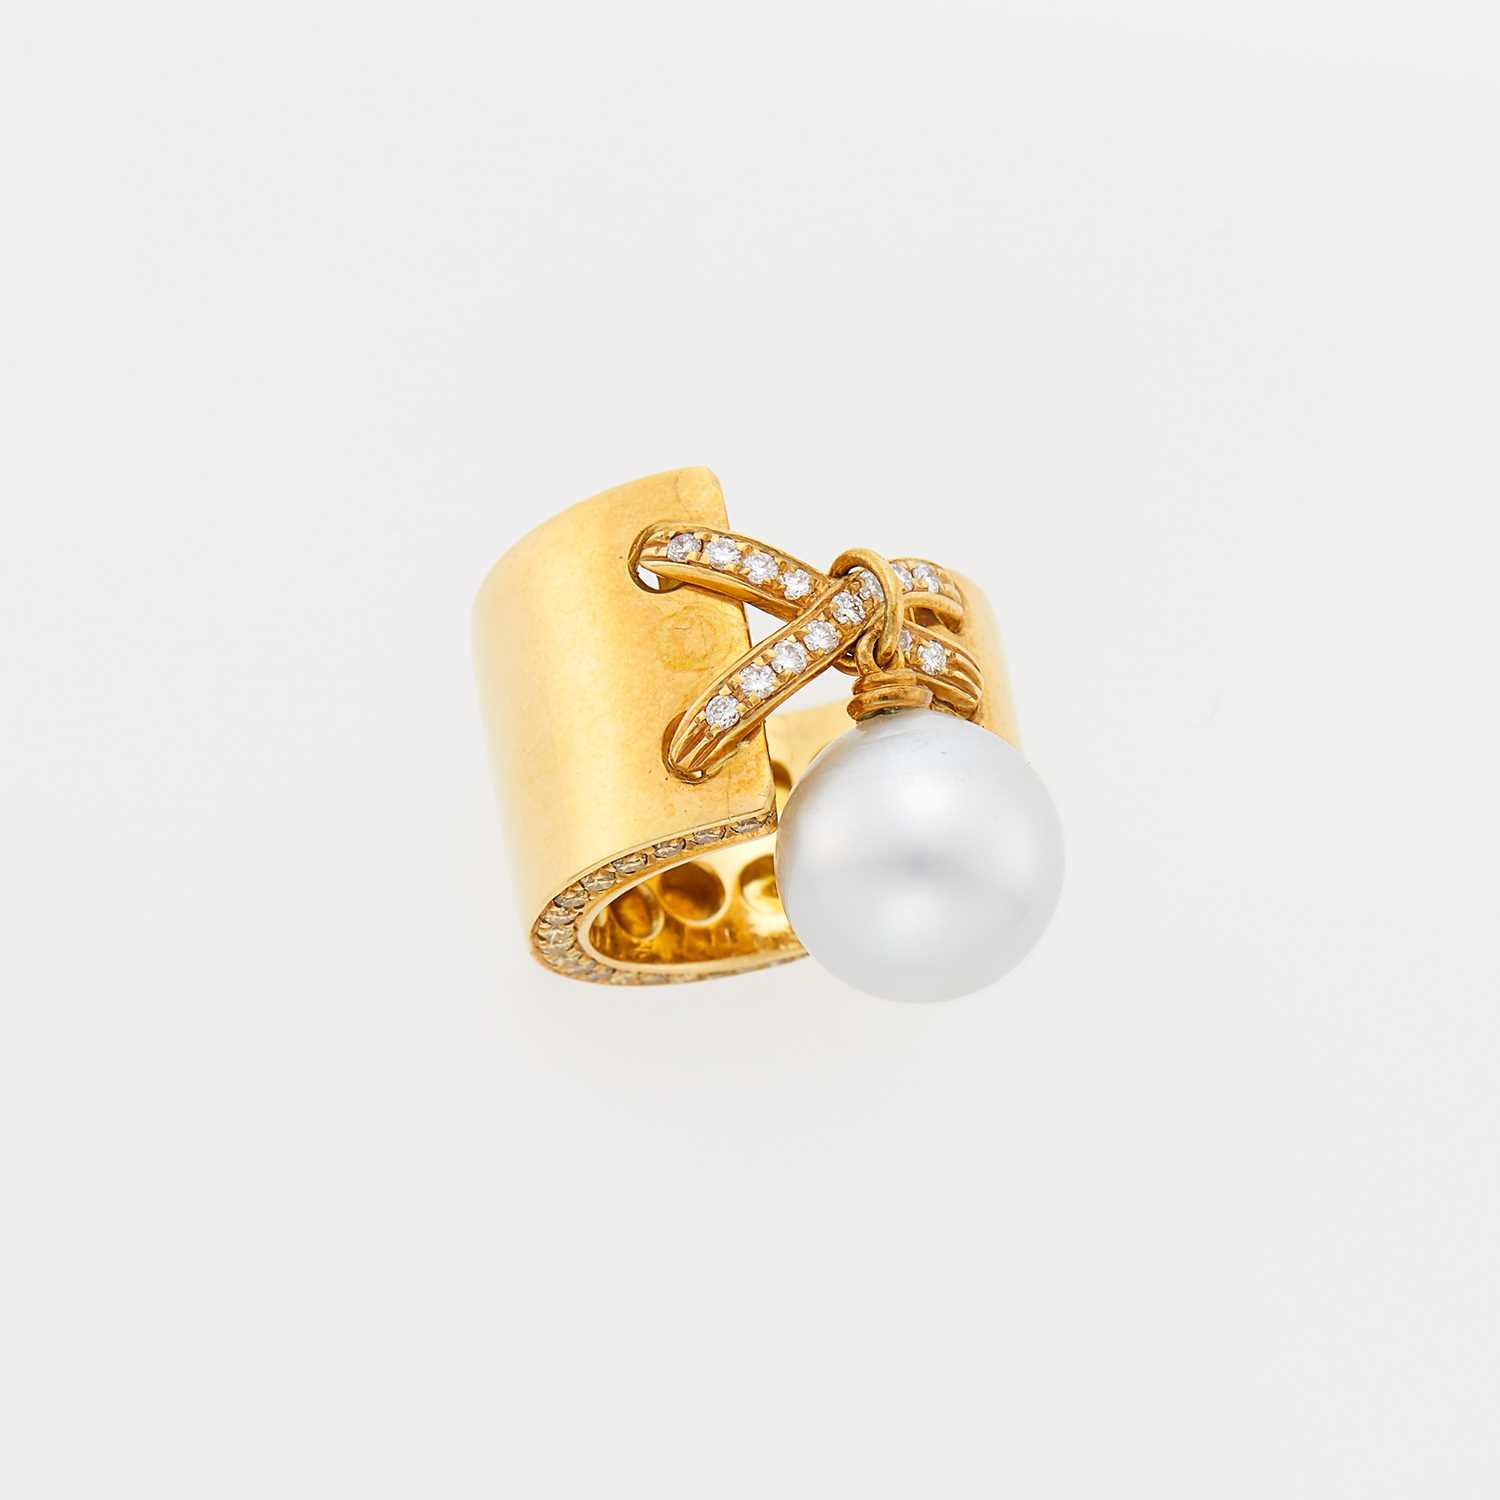 Lot 2089 - Gold, Cultured Pearl, Diamond and Colored Diamond Band Ring